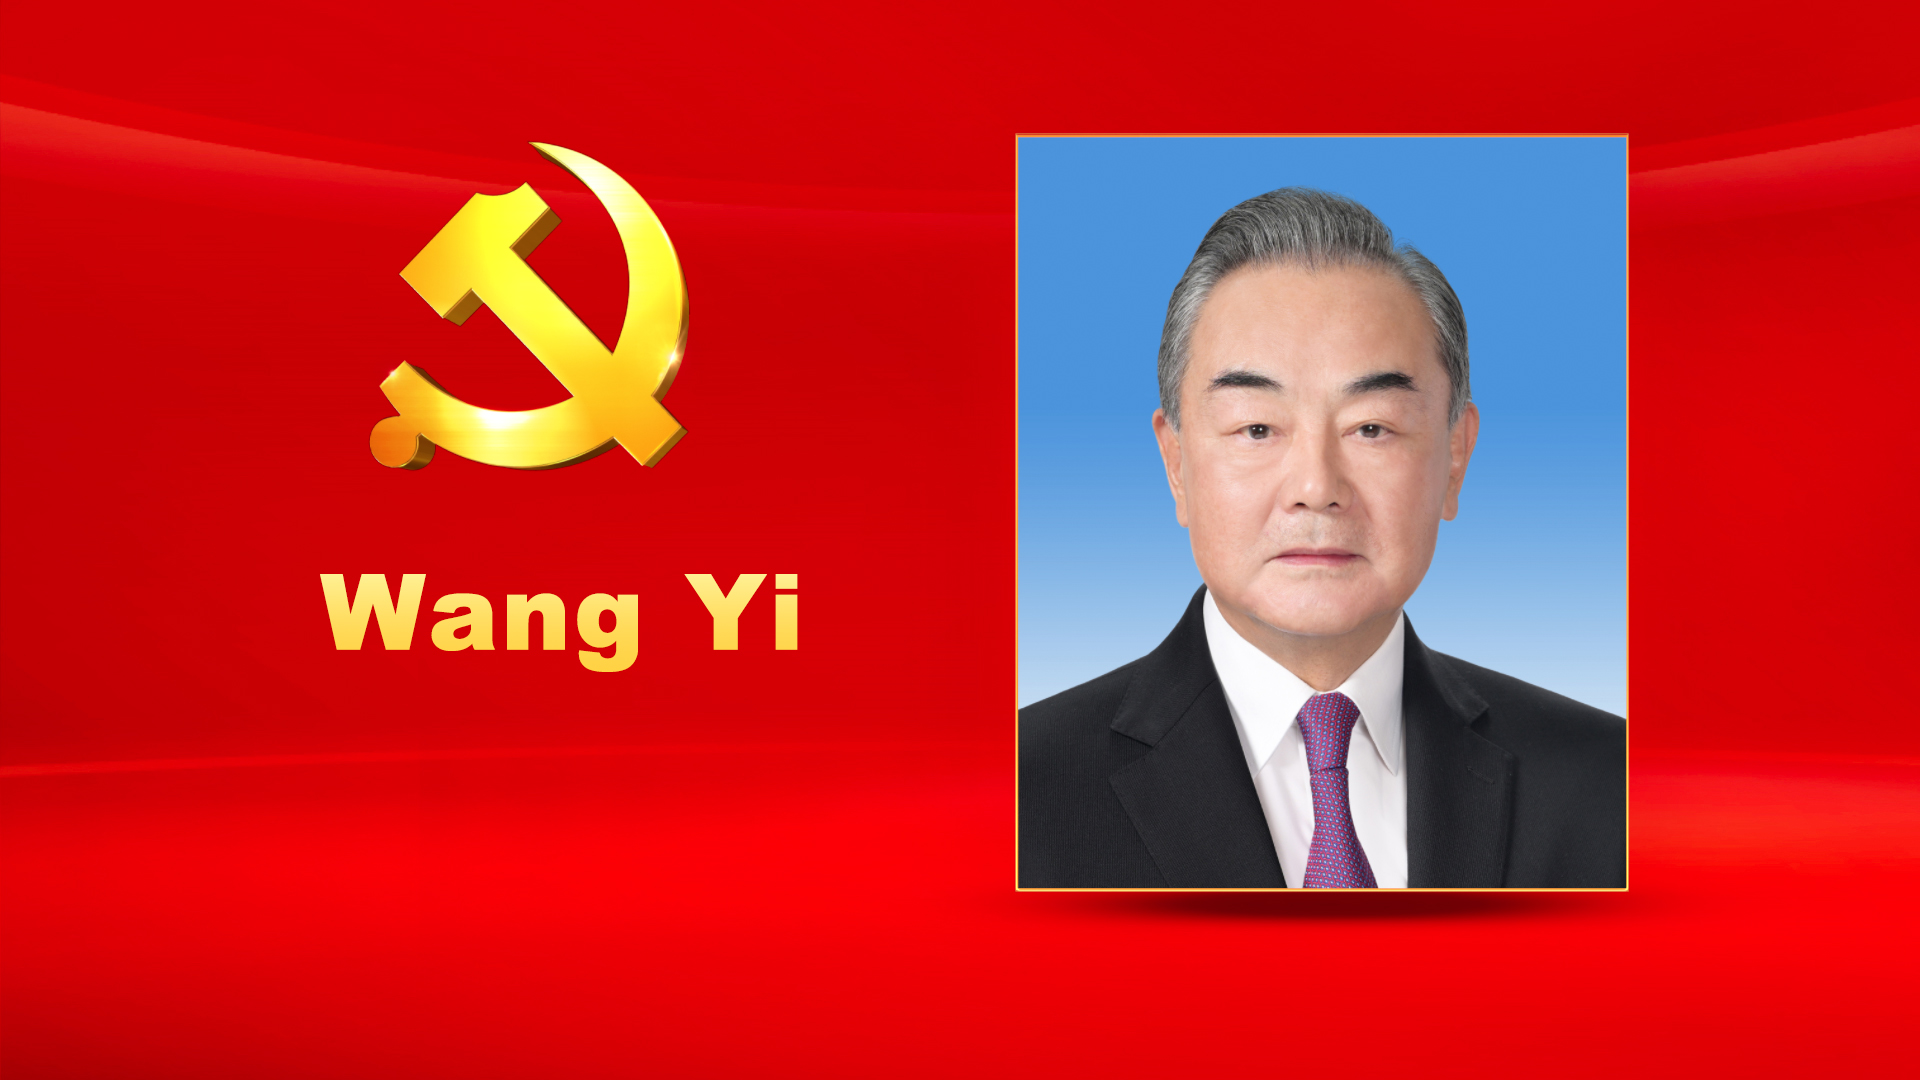 Wang Yi, male, Han ethnicity, was born in October 1953 and is from Beijing. He began his first job in September 1969 and joined the Communist Party of China (CPC) in May 1981. Wang graduated from Department of Asian and African Languages, Beijing Second Institute of Foreign Languages where he completed an undergraduate program. He holds a Master of Economics degree. Wang is currently a member of the CPC Central Committee Political Bureau, State Councilor, a member of the Leading Party Members Group of the State Council, and Minister of Foreign Affairs.